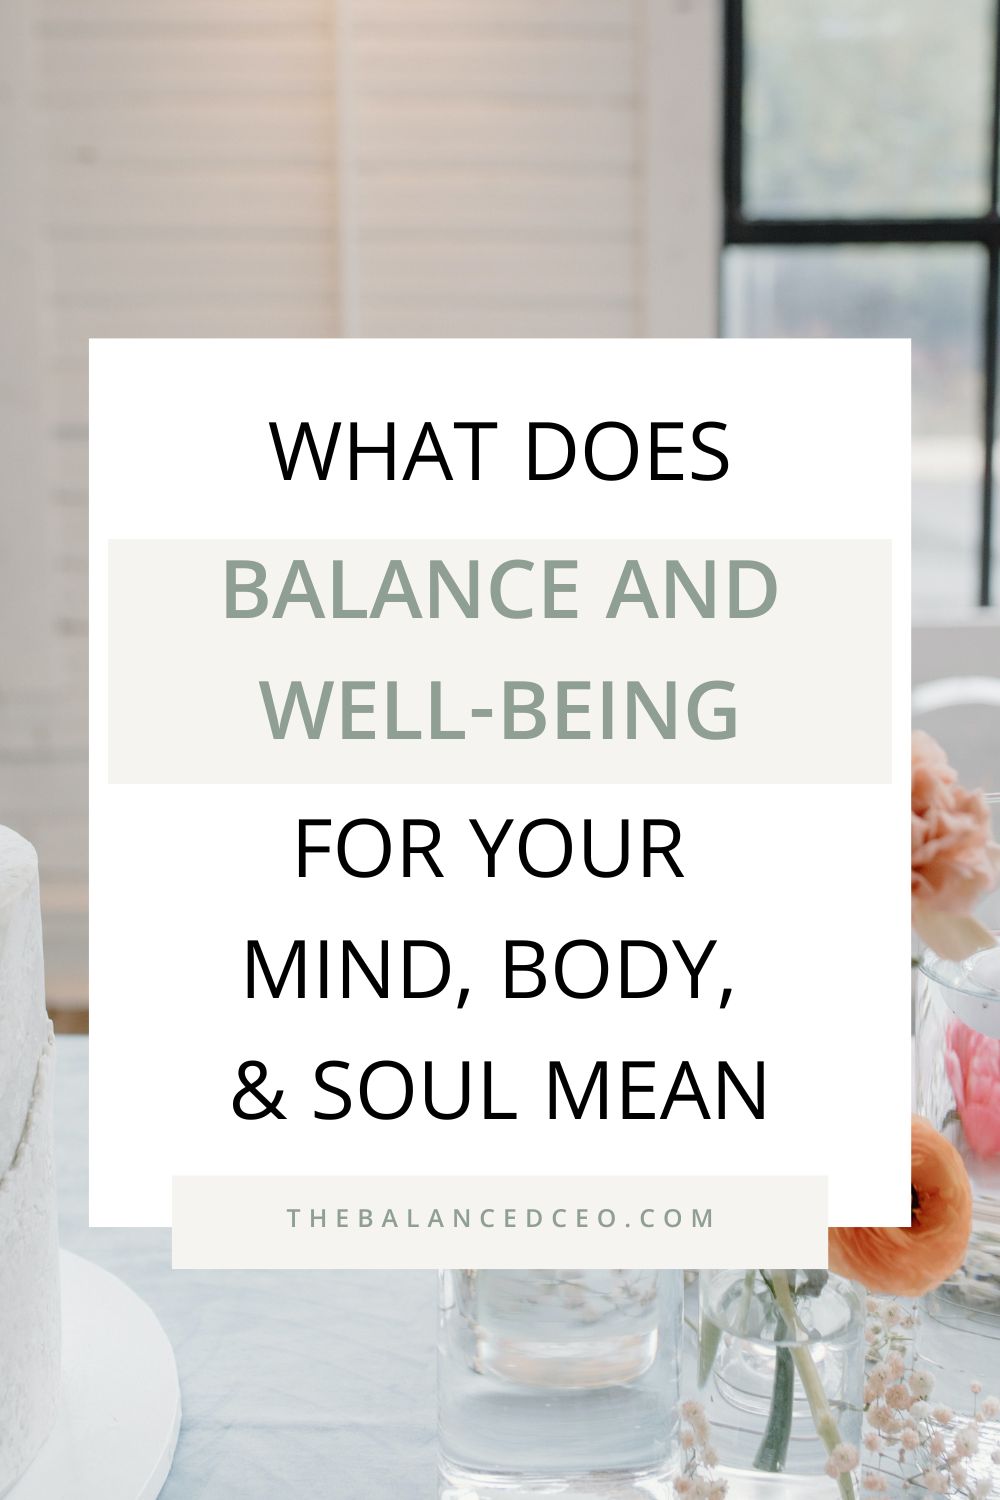 What Do Balance and Well-Being for Your Mind, Body, and Soul Mean?